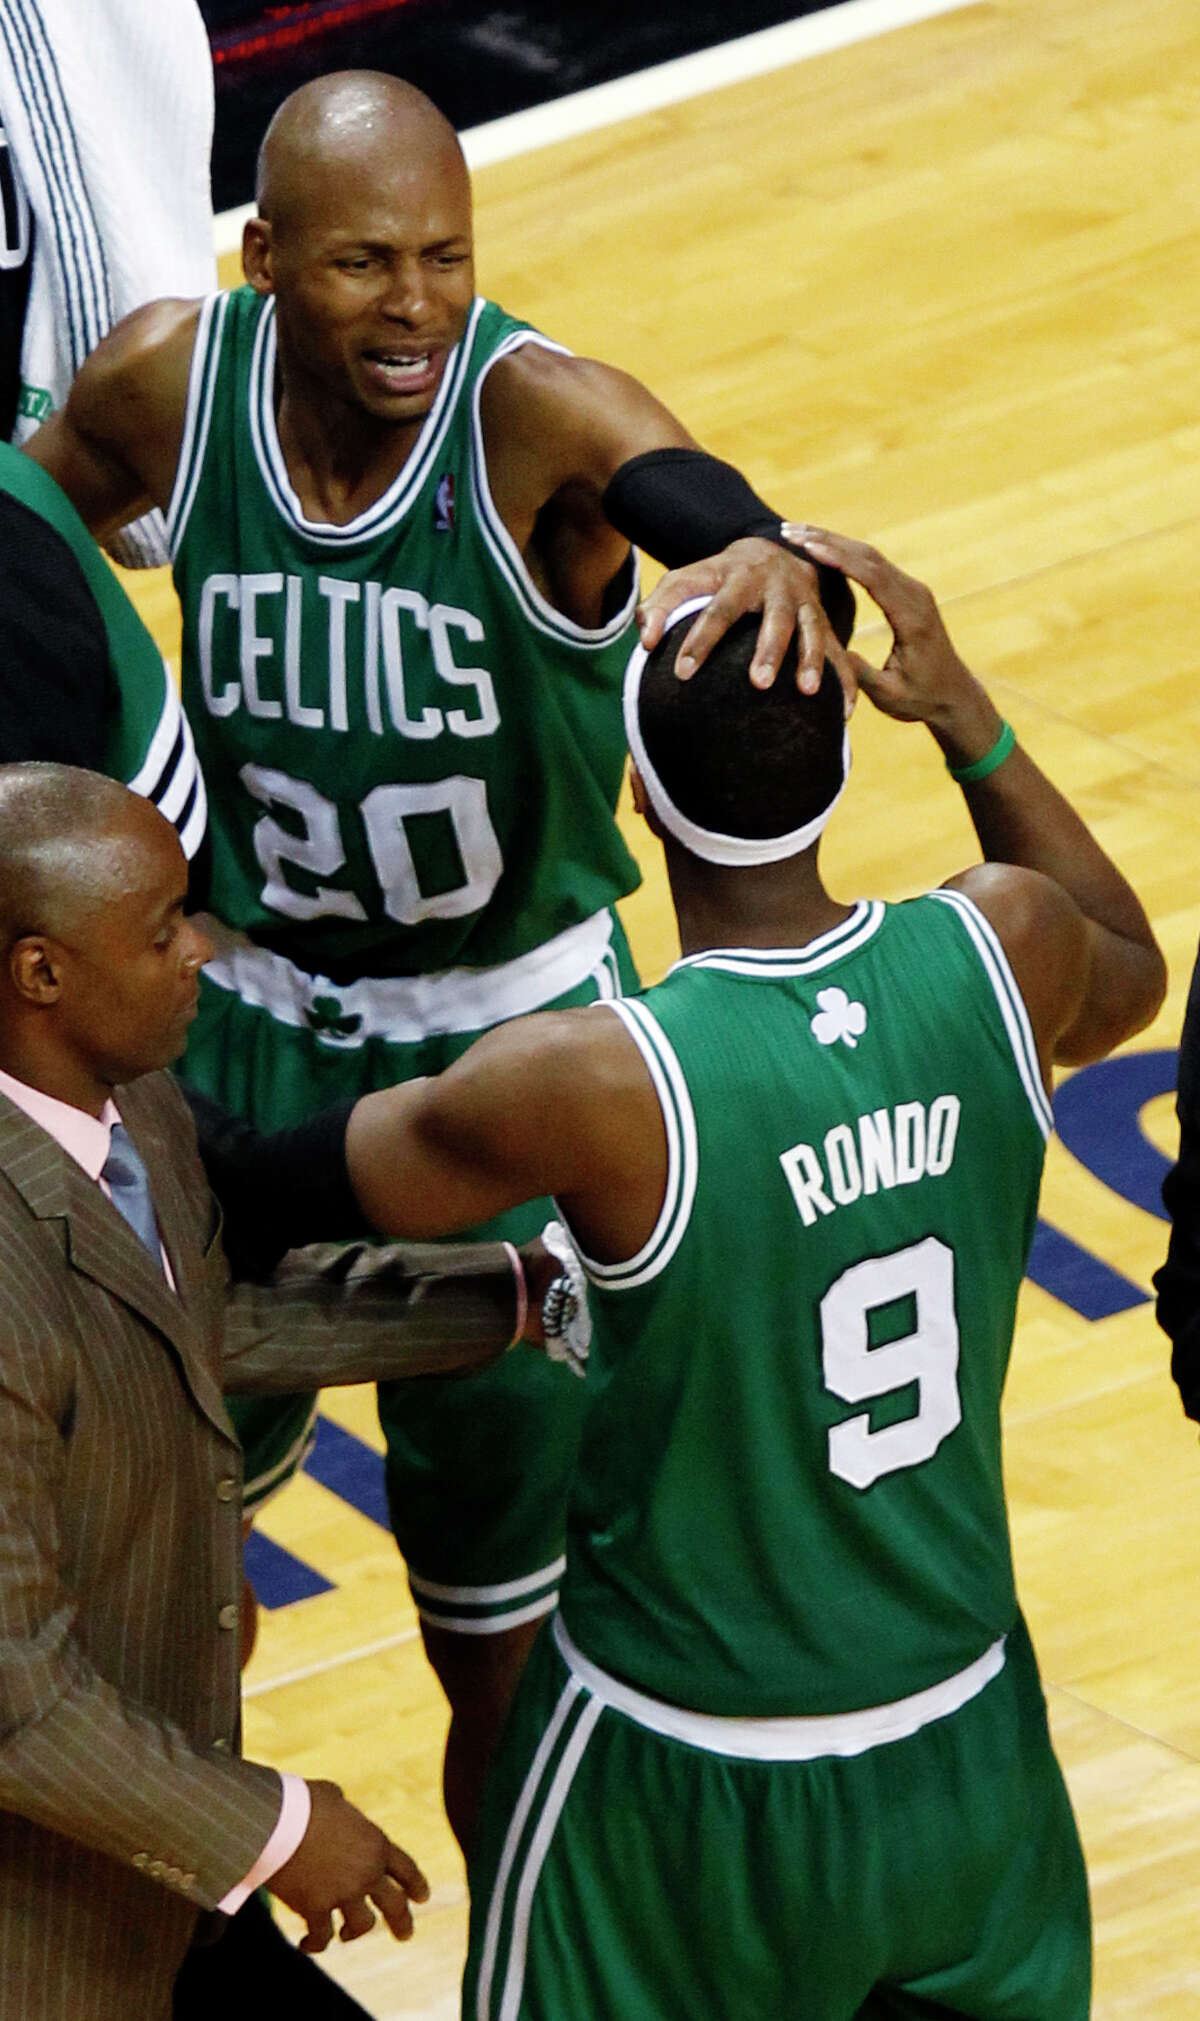 Boston Celtics' Ray Allen (20) congratulates Rajon Rondo (9) during the second half of Game 5 in their NBA basketball Eastern Conference finals playoffs series against the Miami Heat, Tuesday, June 5, 2012, in Miami. The Celtics won 94-90. (AP Photo/Wilfredo Lee)